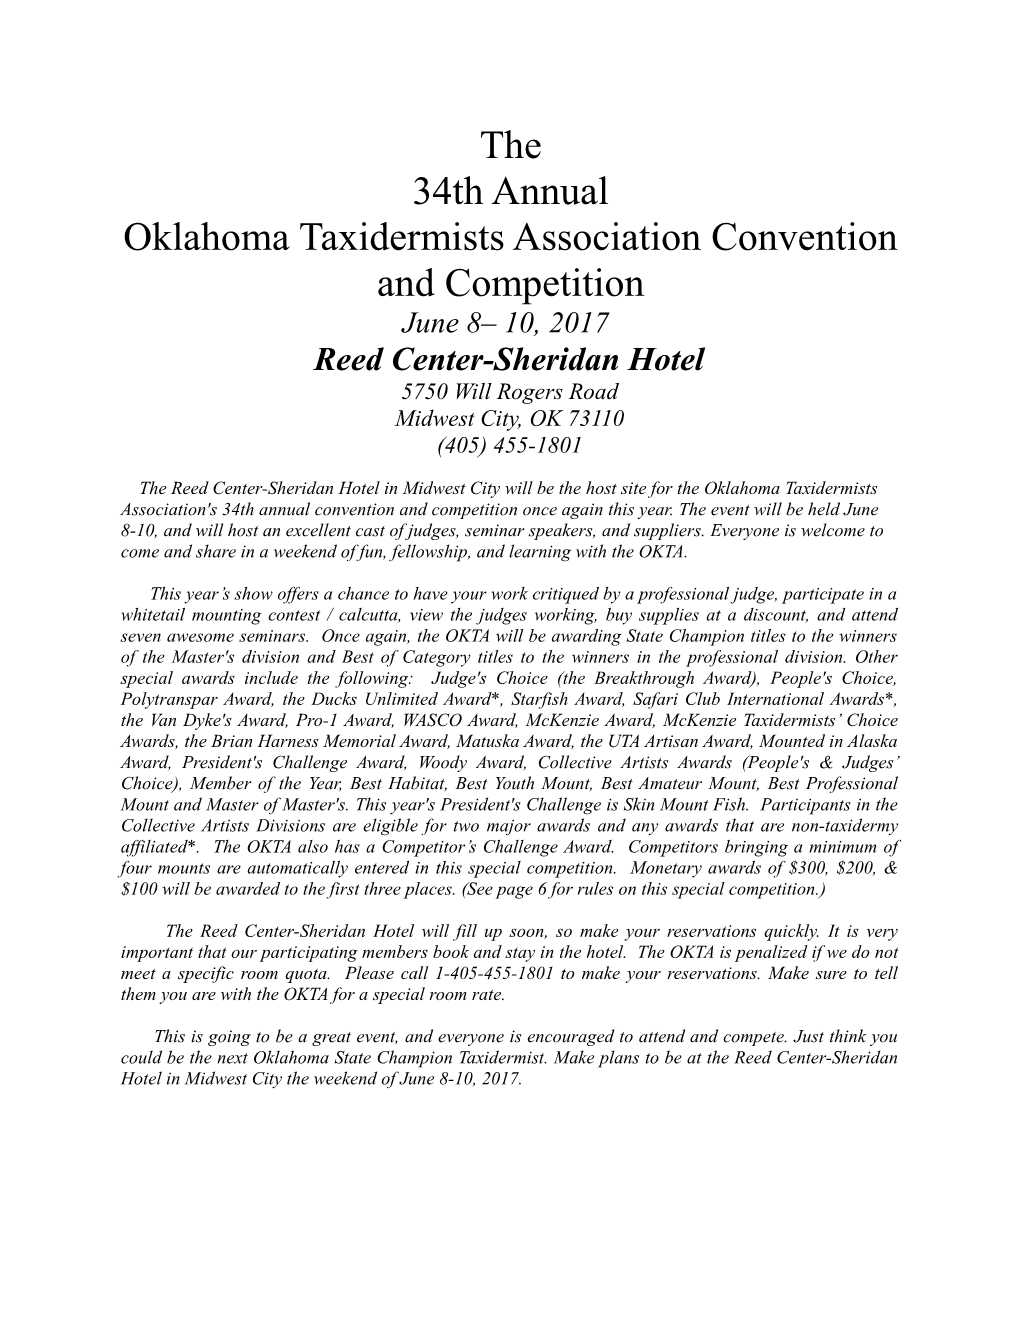 Oklahoma Taxidermists Association Convention and Competition